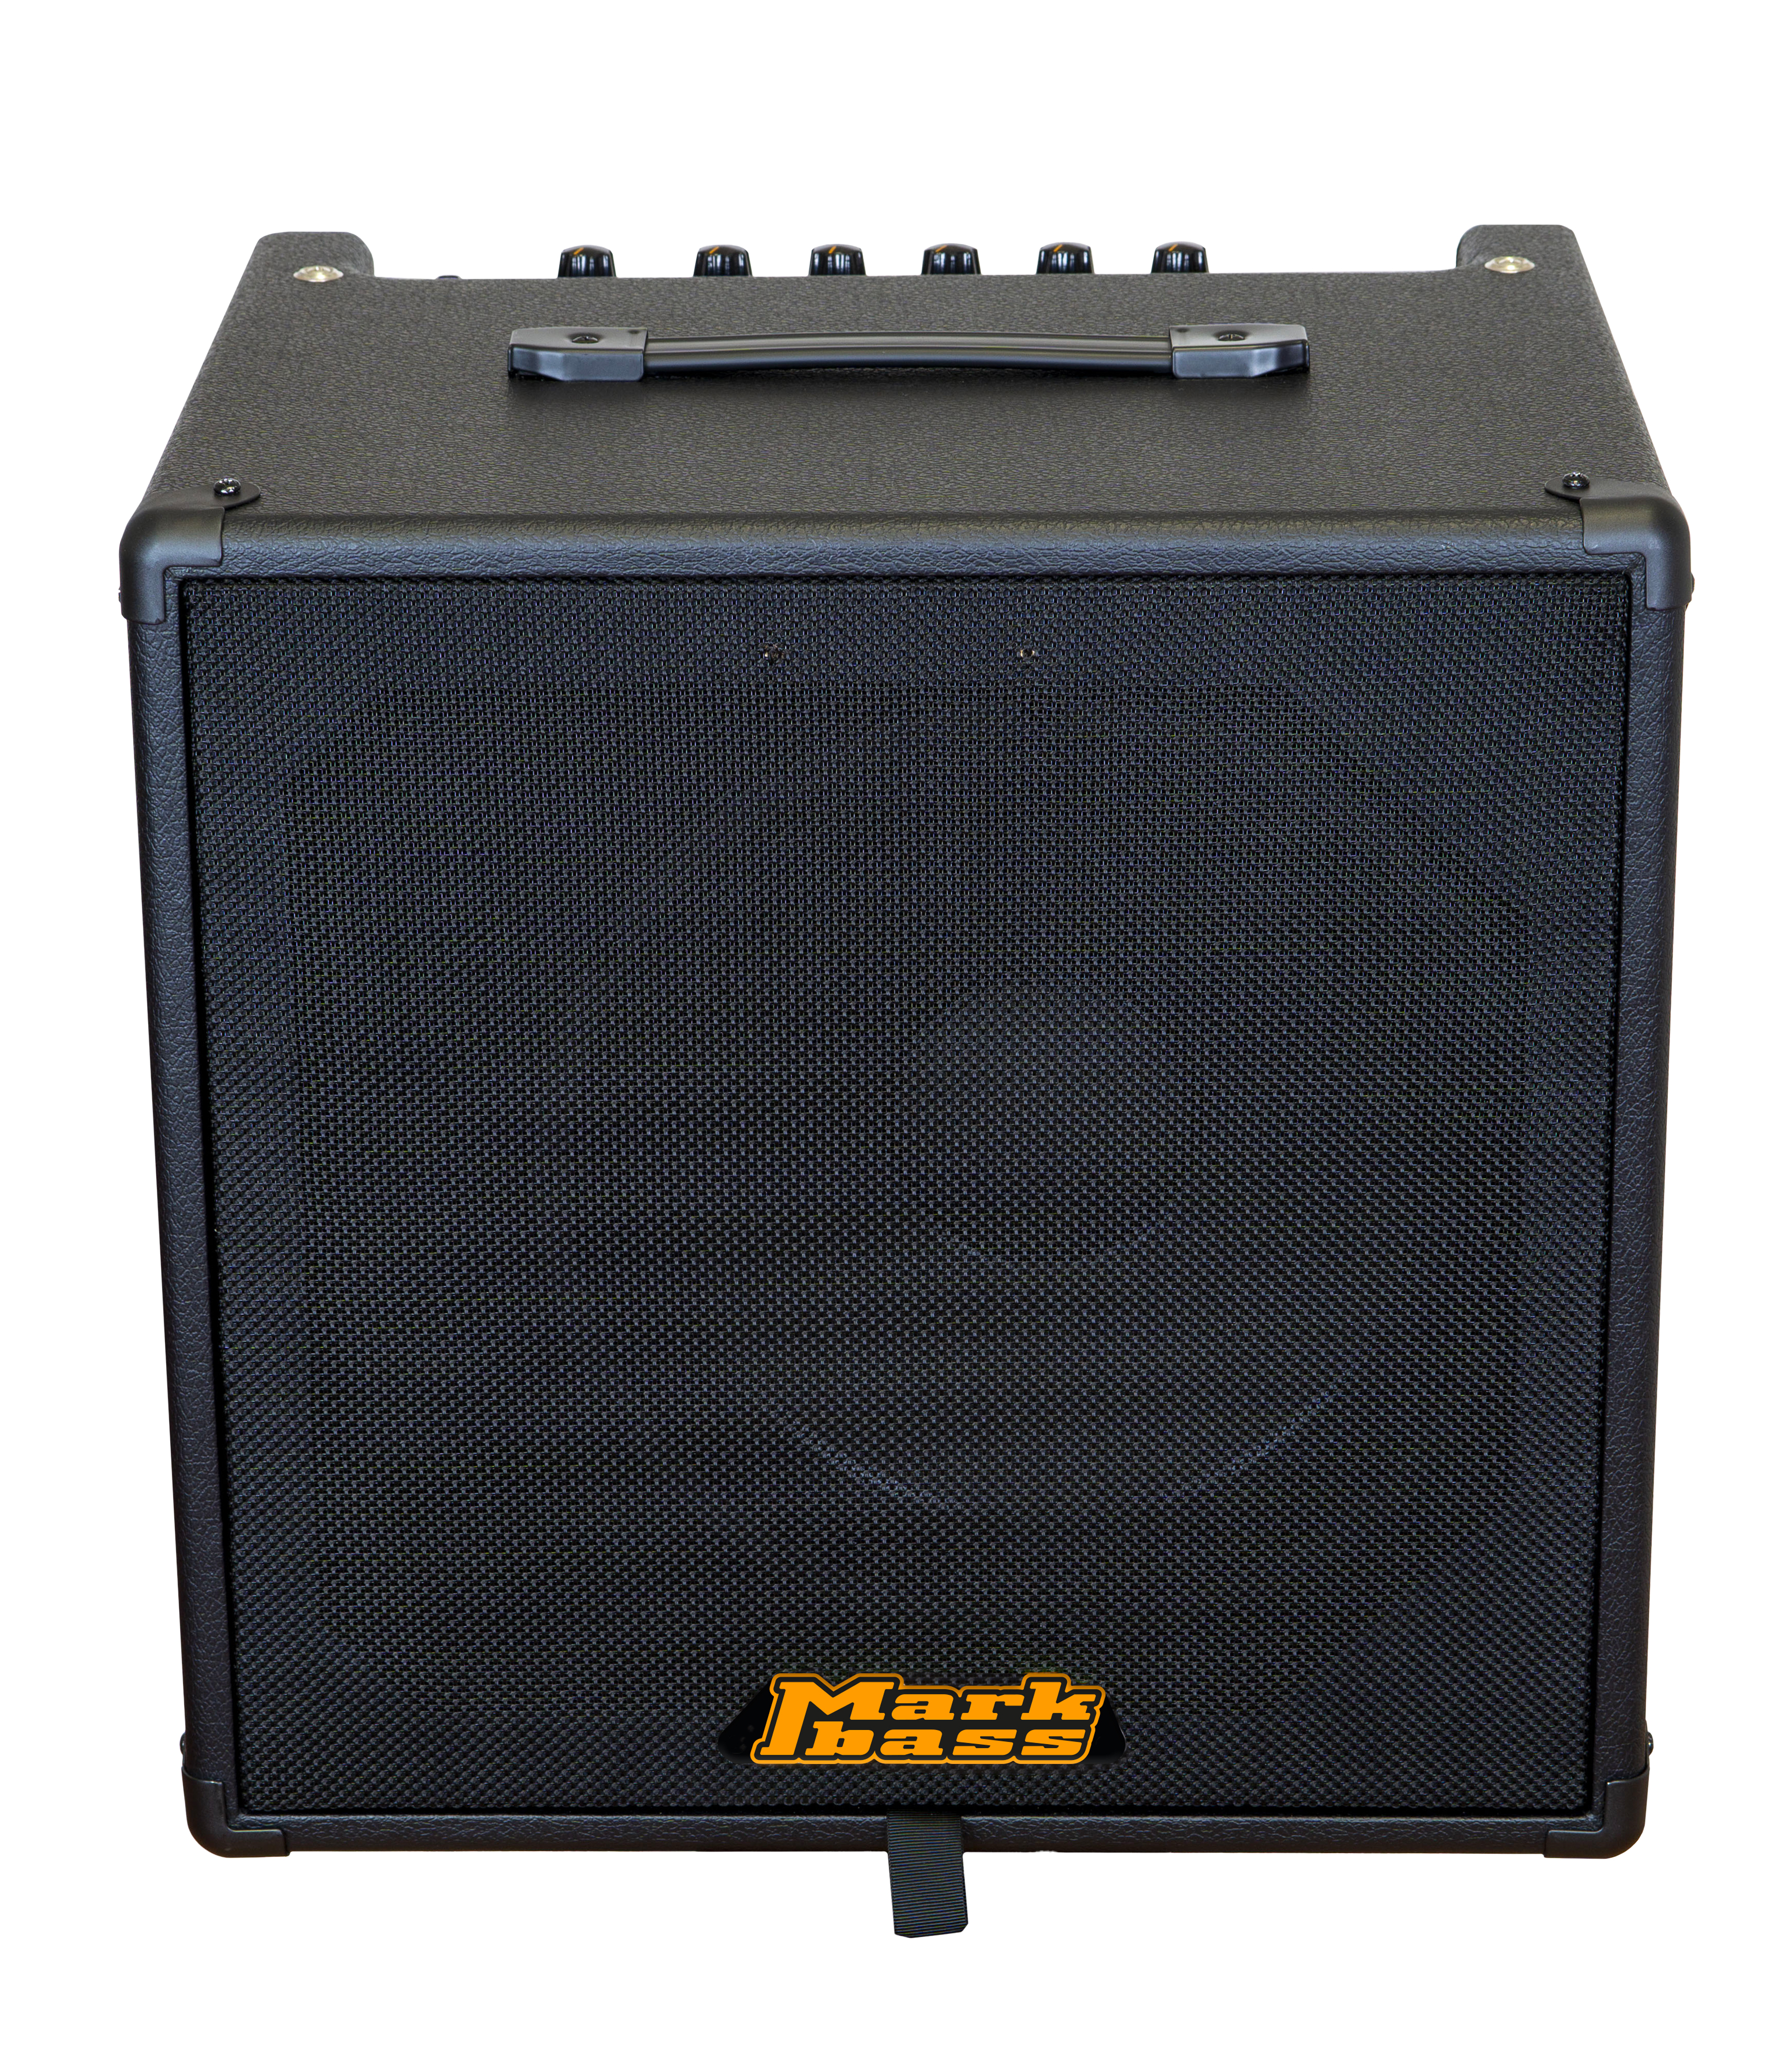 Markbass Cmb 121 Black Line Combo 150w 1x12 - Combo voor basses - Variation 1